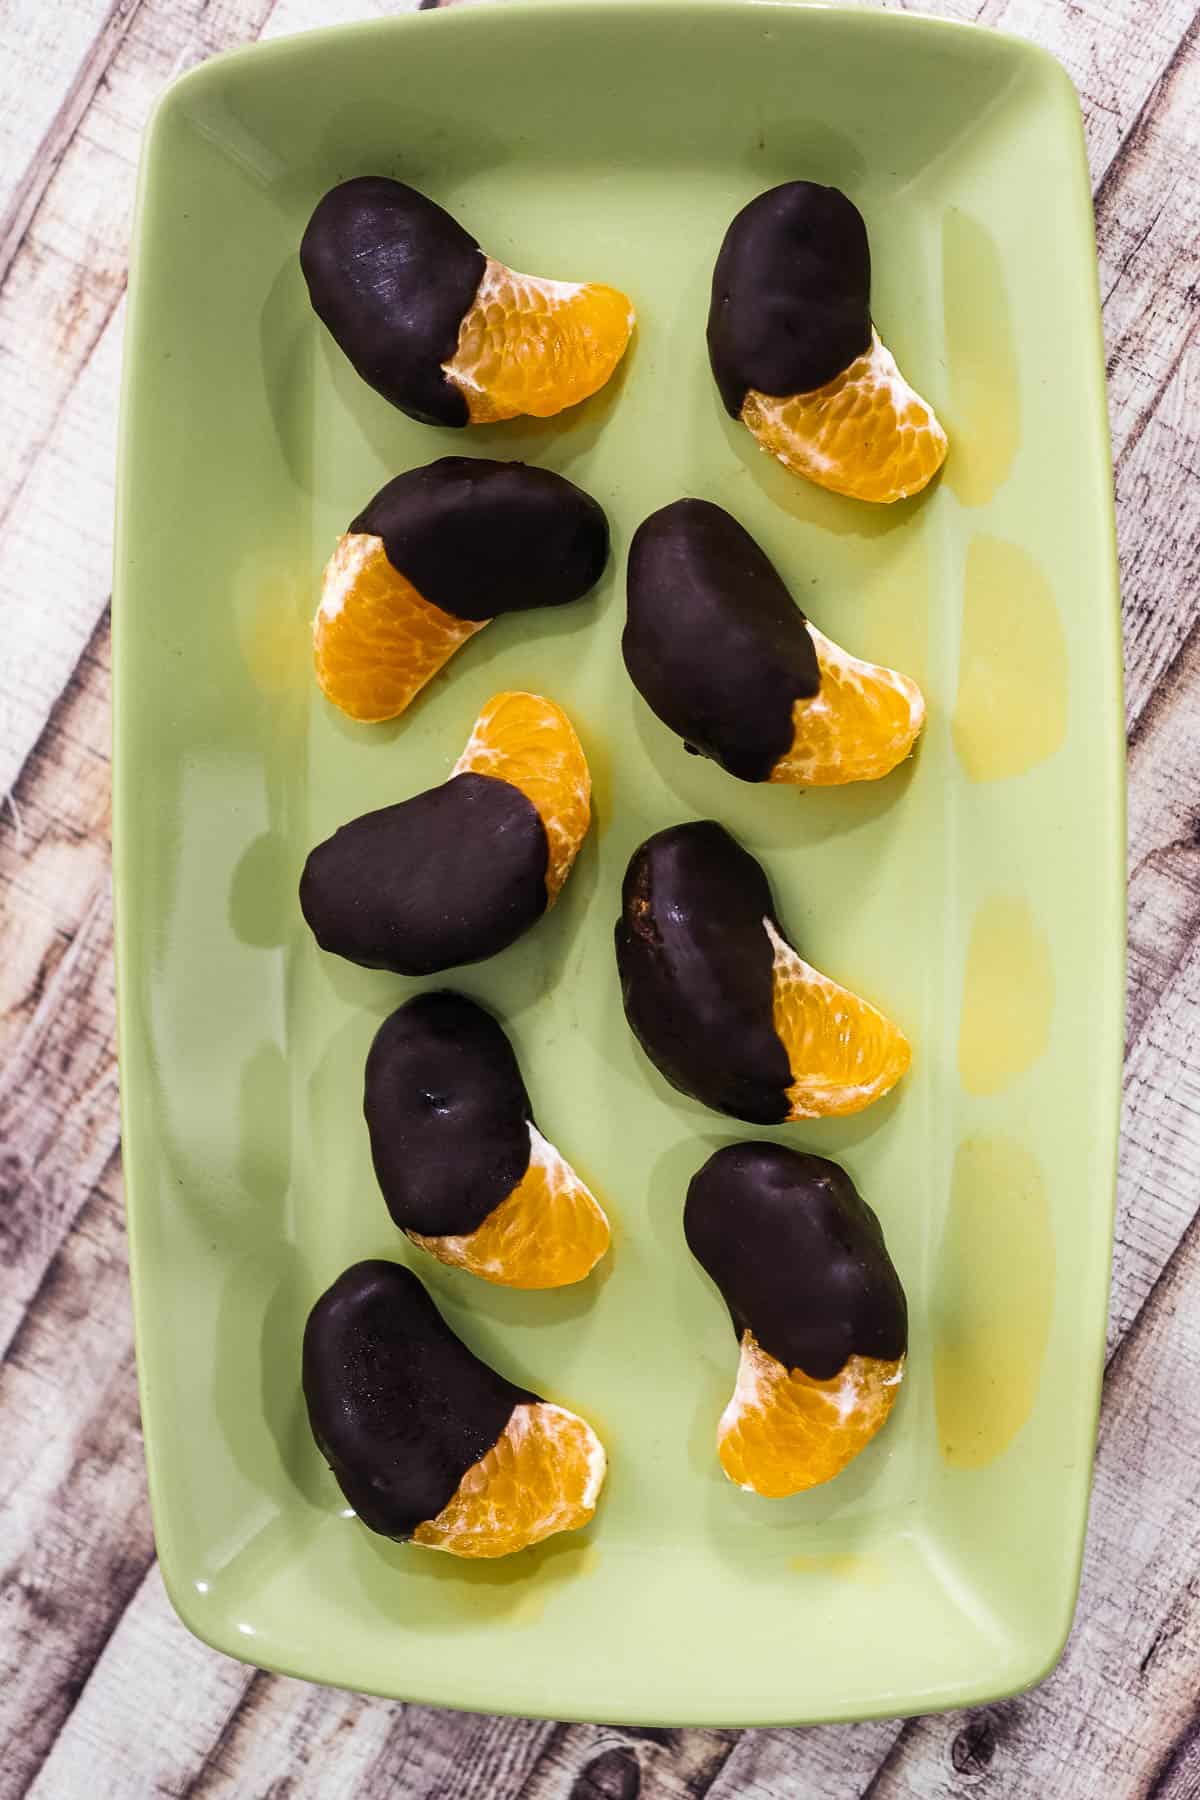 Chocolate dipped orange segments on a green rectangle plate against a white wood background